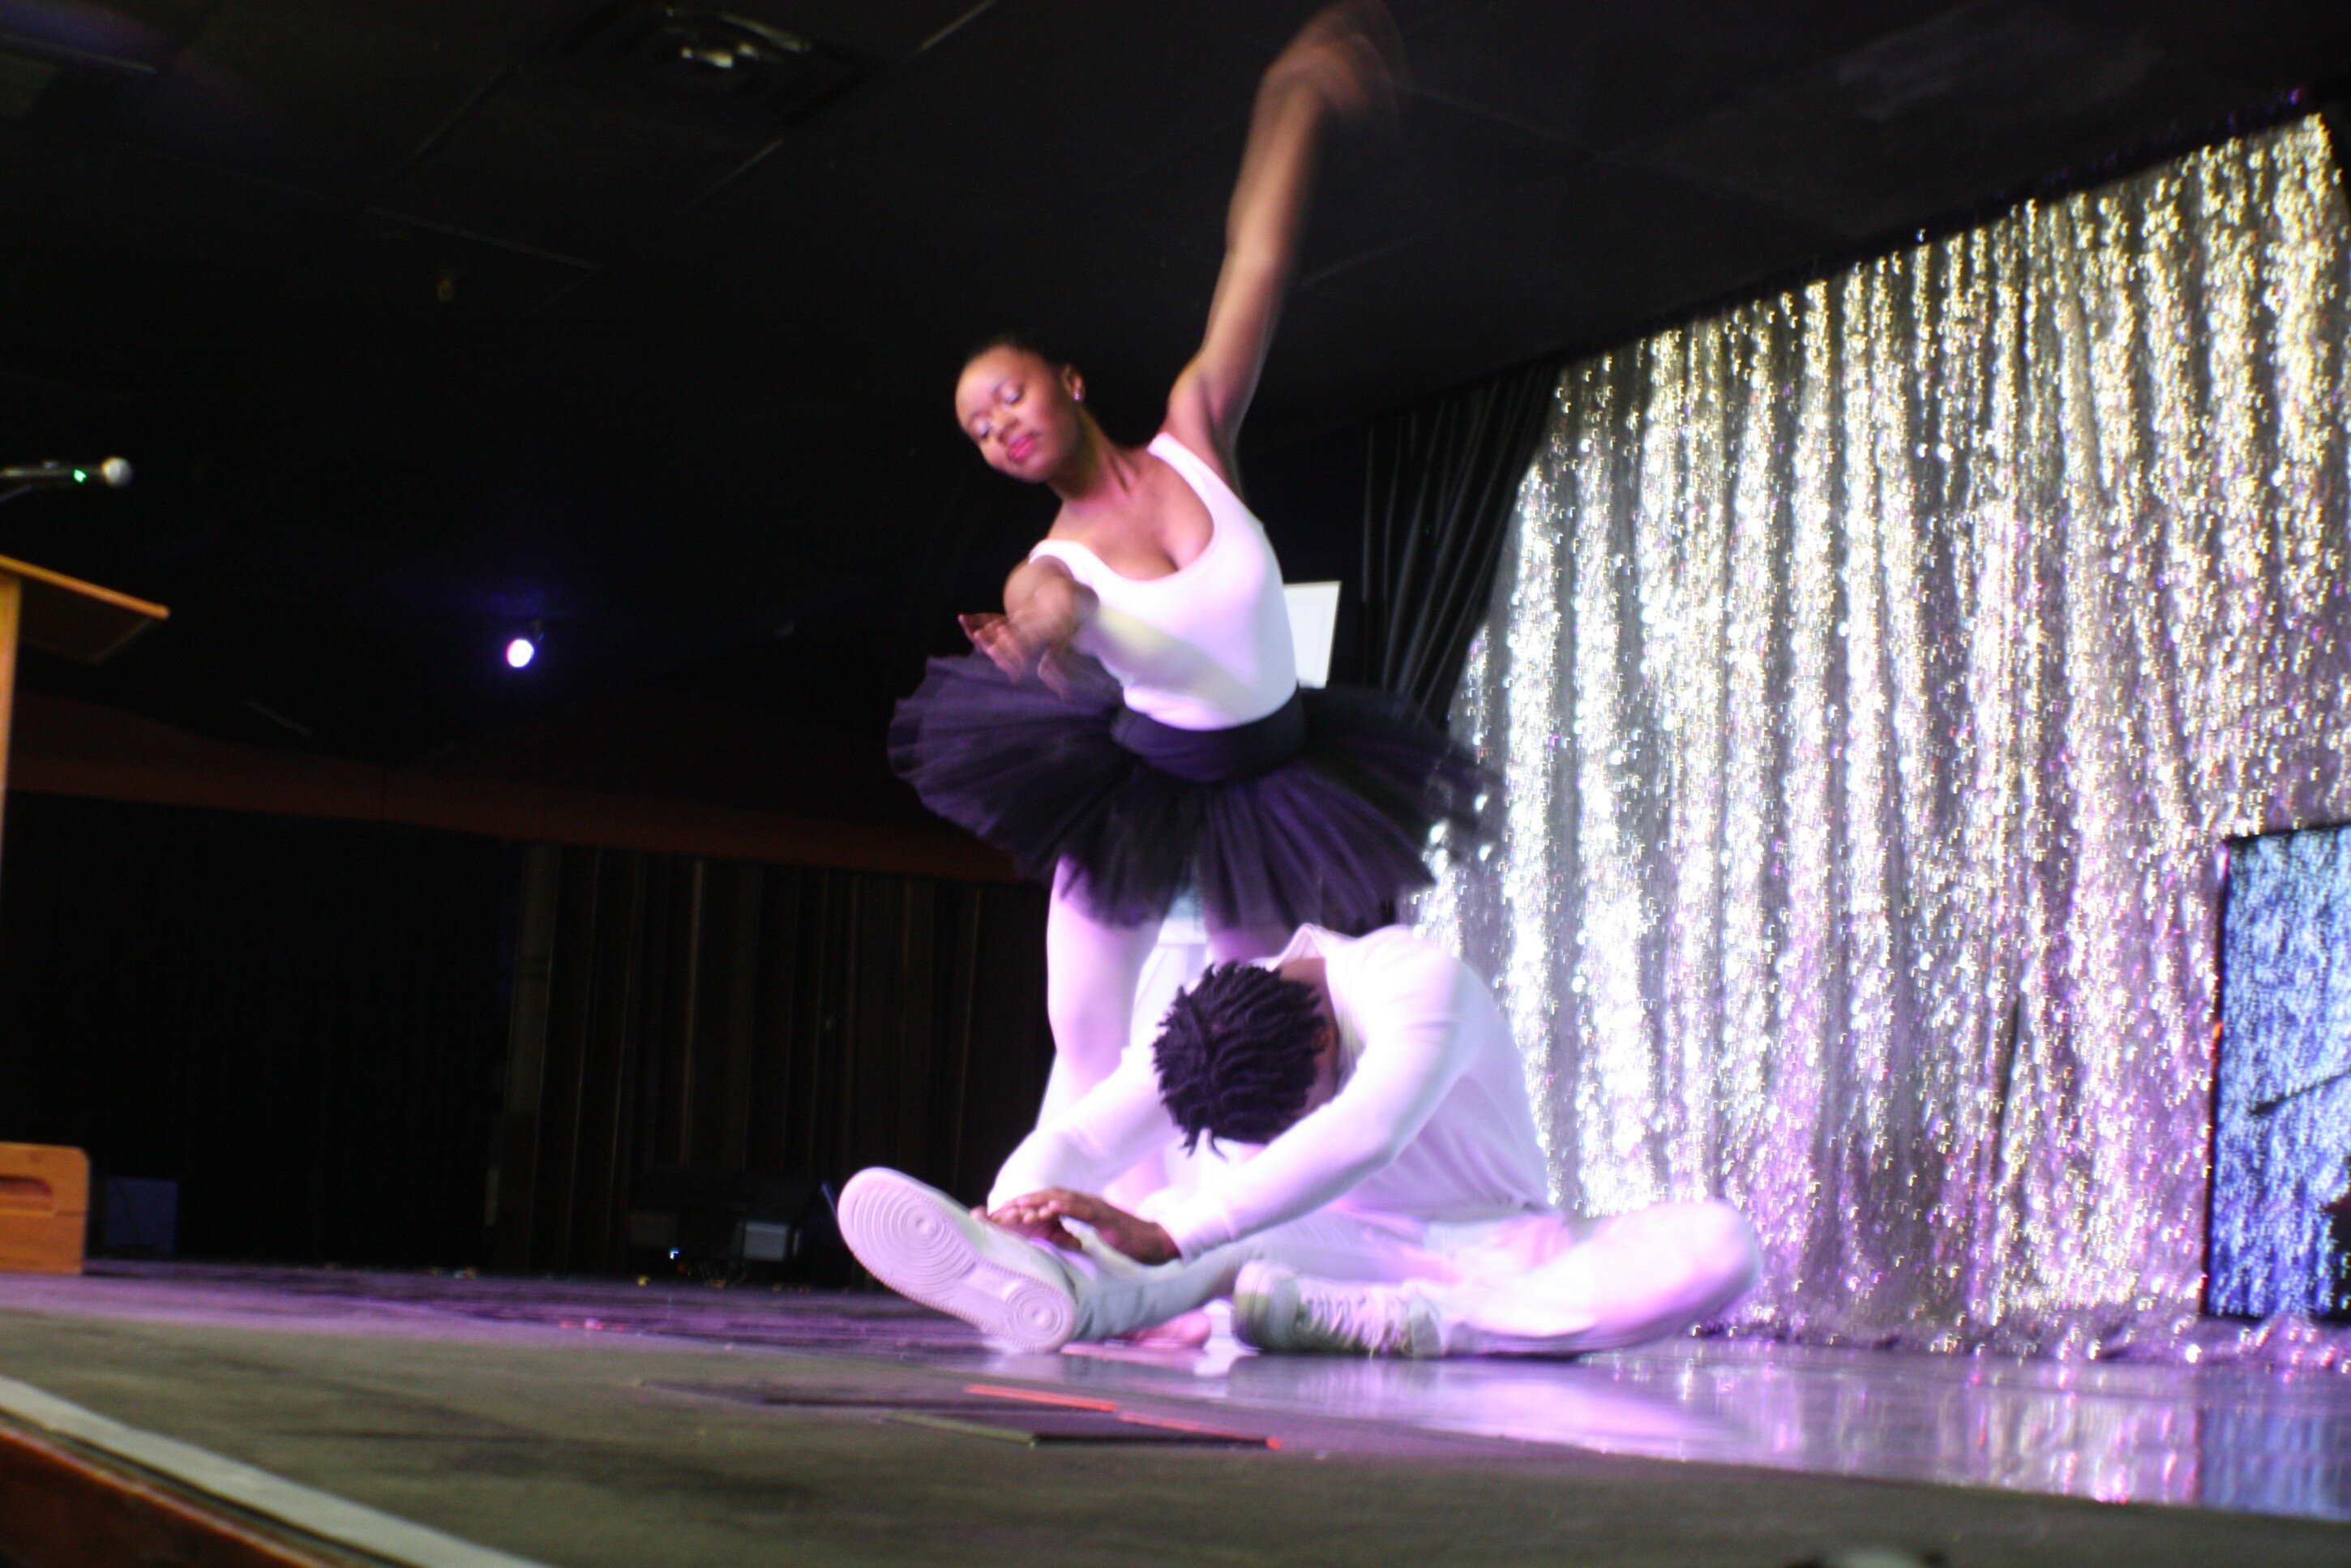 The 2020 Trailblazer Awards featured a performance by the New Ballet Ensemble and School. The performance fused traditional ballet with Memphis Jookin. (Cole Bradley) 